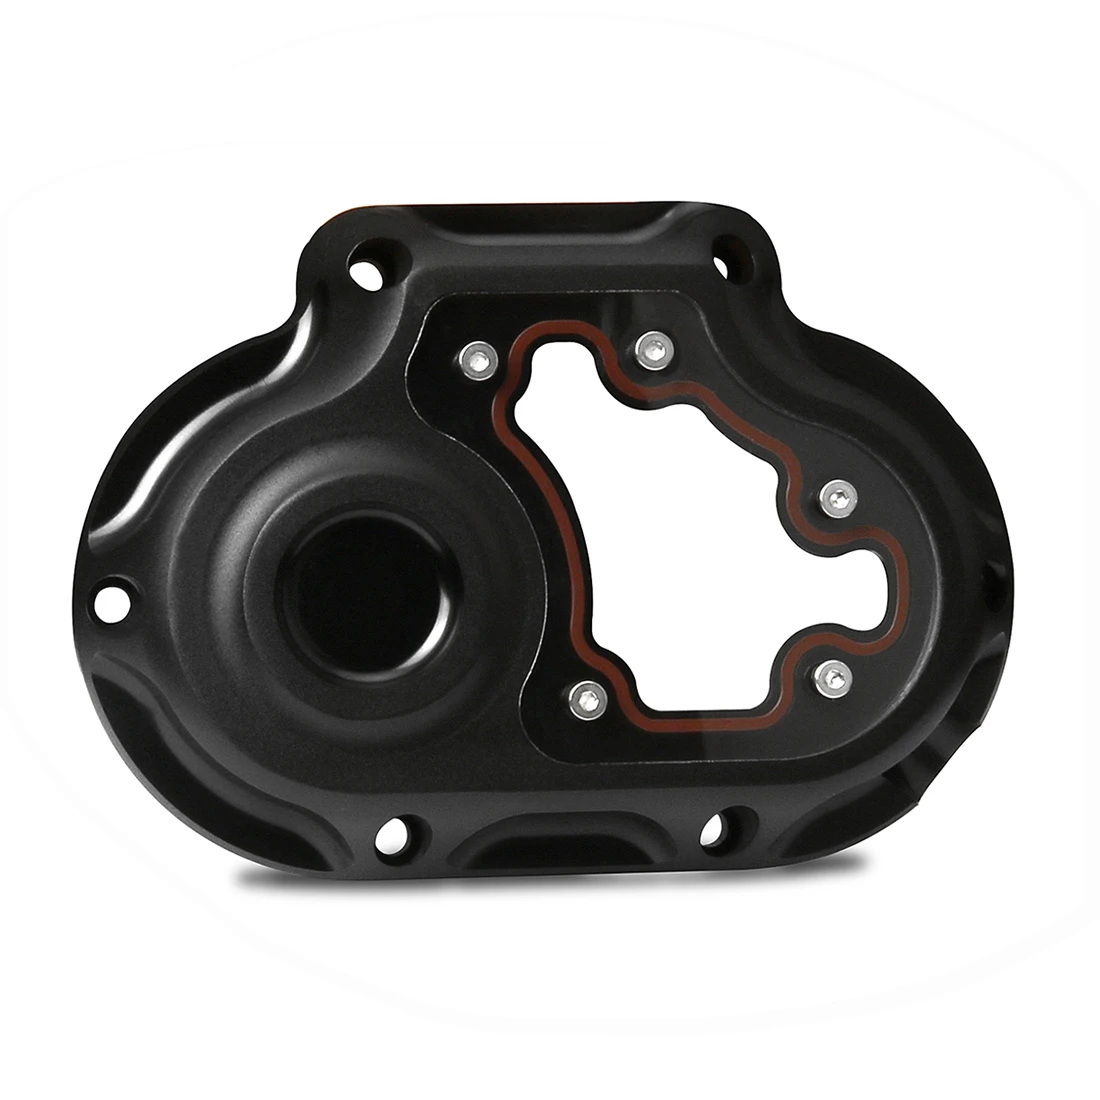 

Black Clarity Transmission Side Cover For Harley Dyna Low Rider FXDL Fat Bob FXDF Touring Road King FLHR Softail 07-13